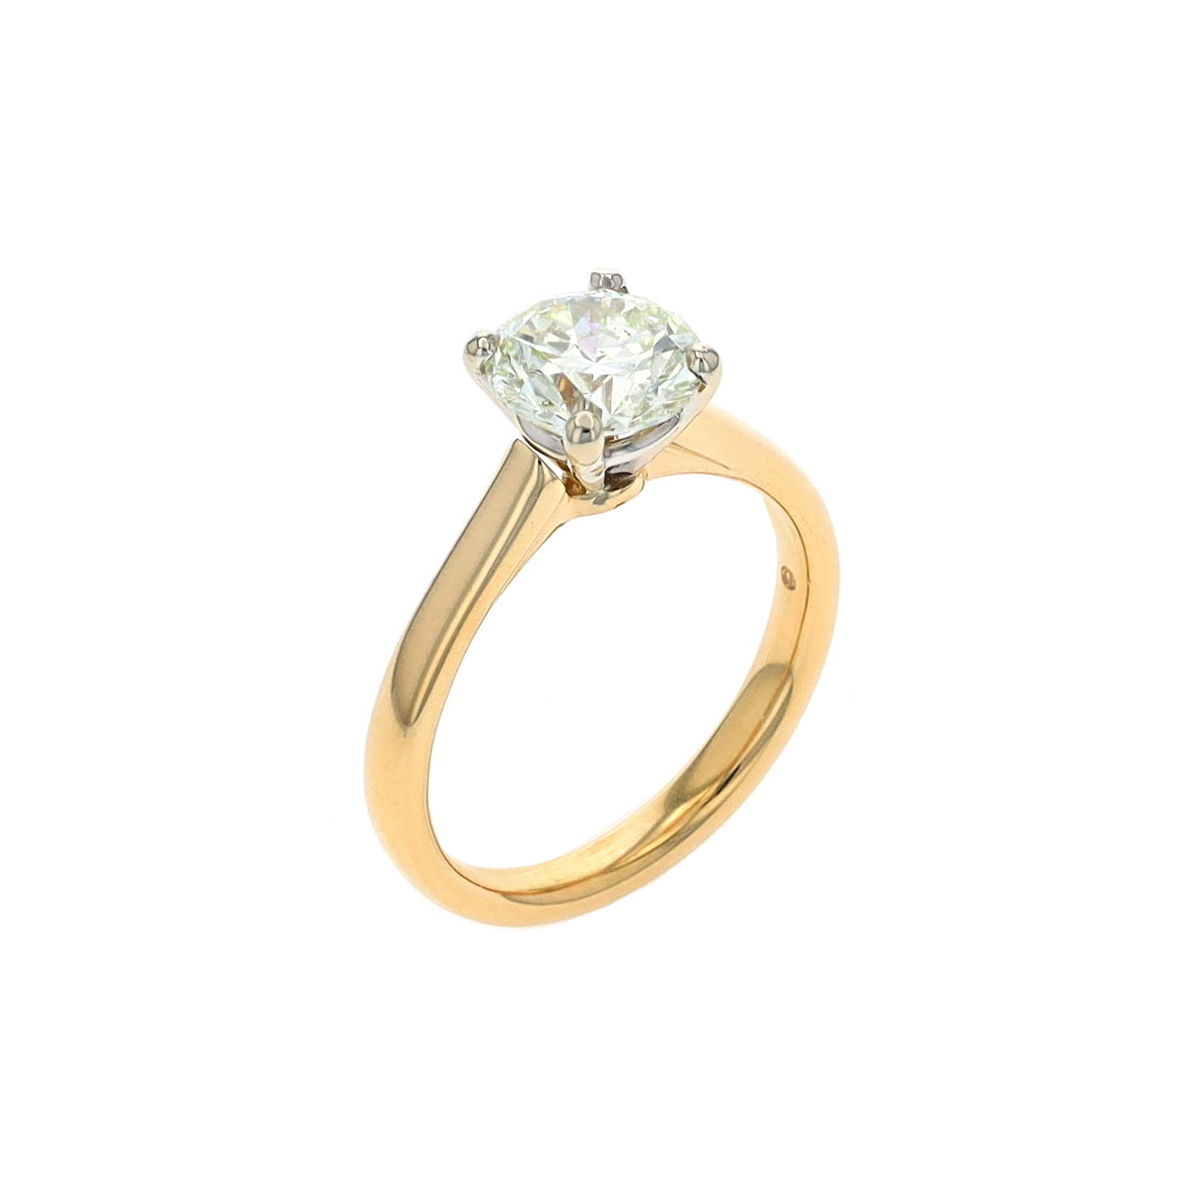 14K Yellow Gold 1.60 Carat Diamond Solitaire Engagement Ring